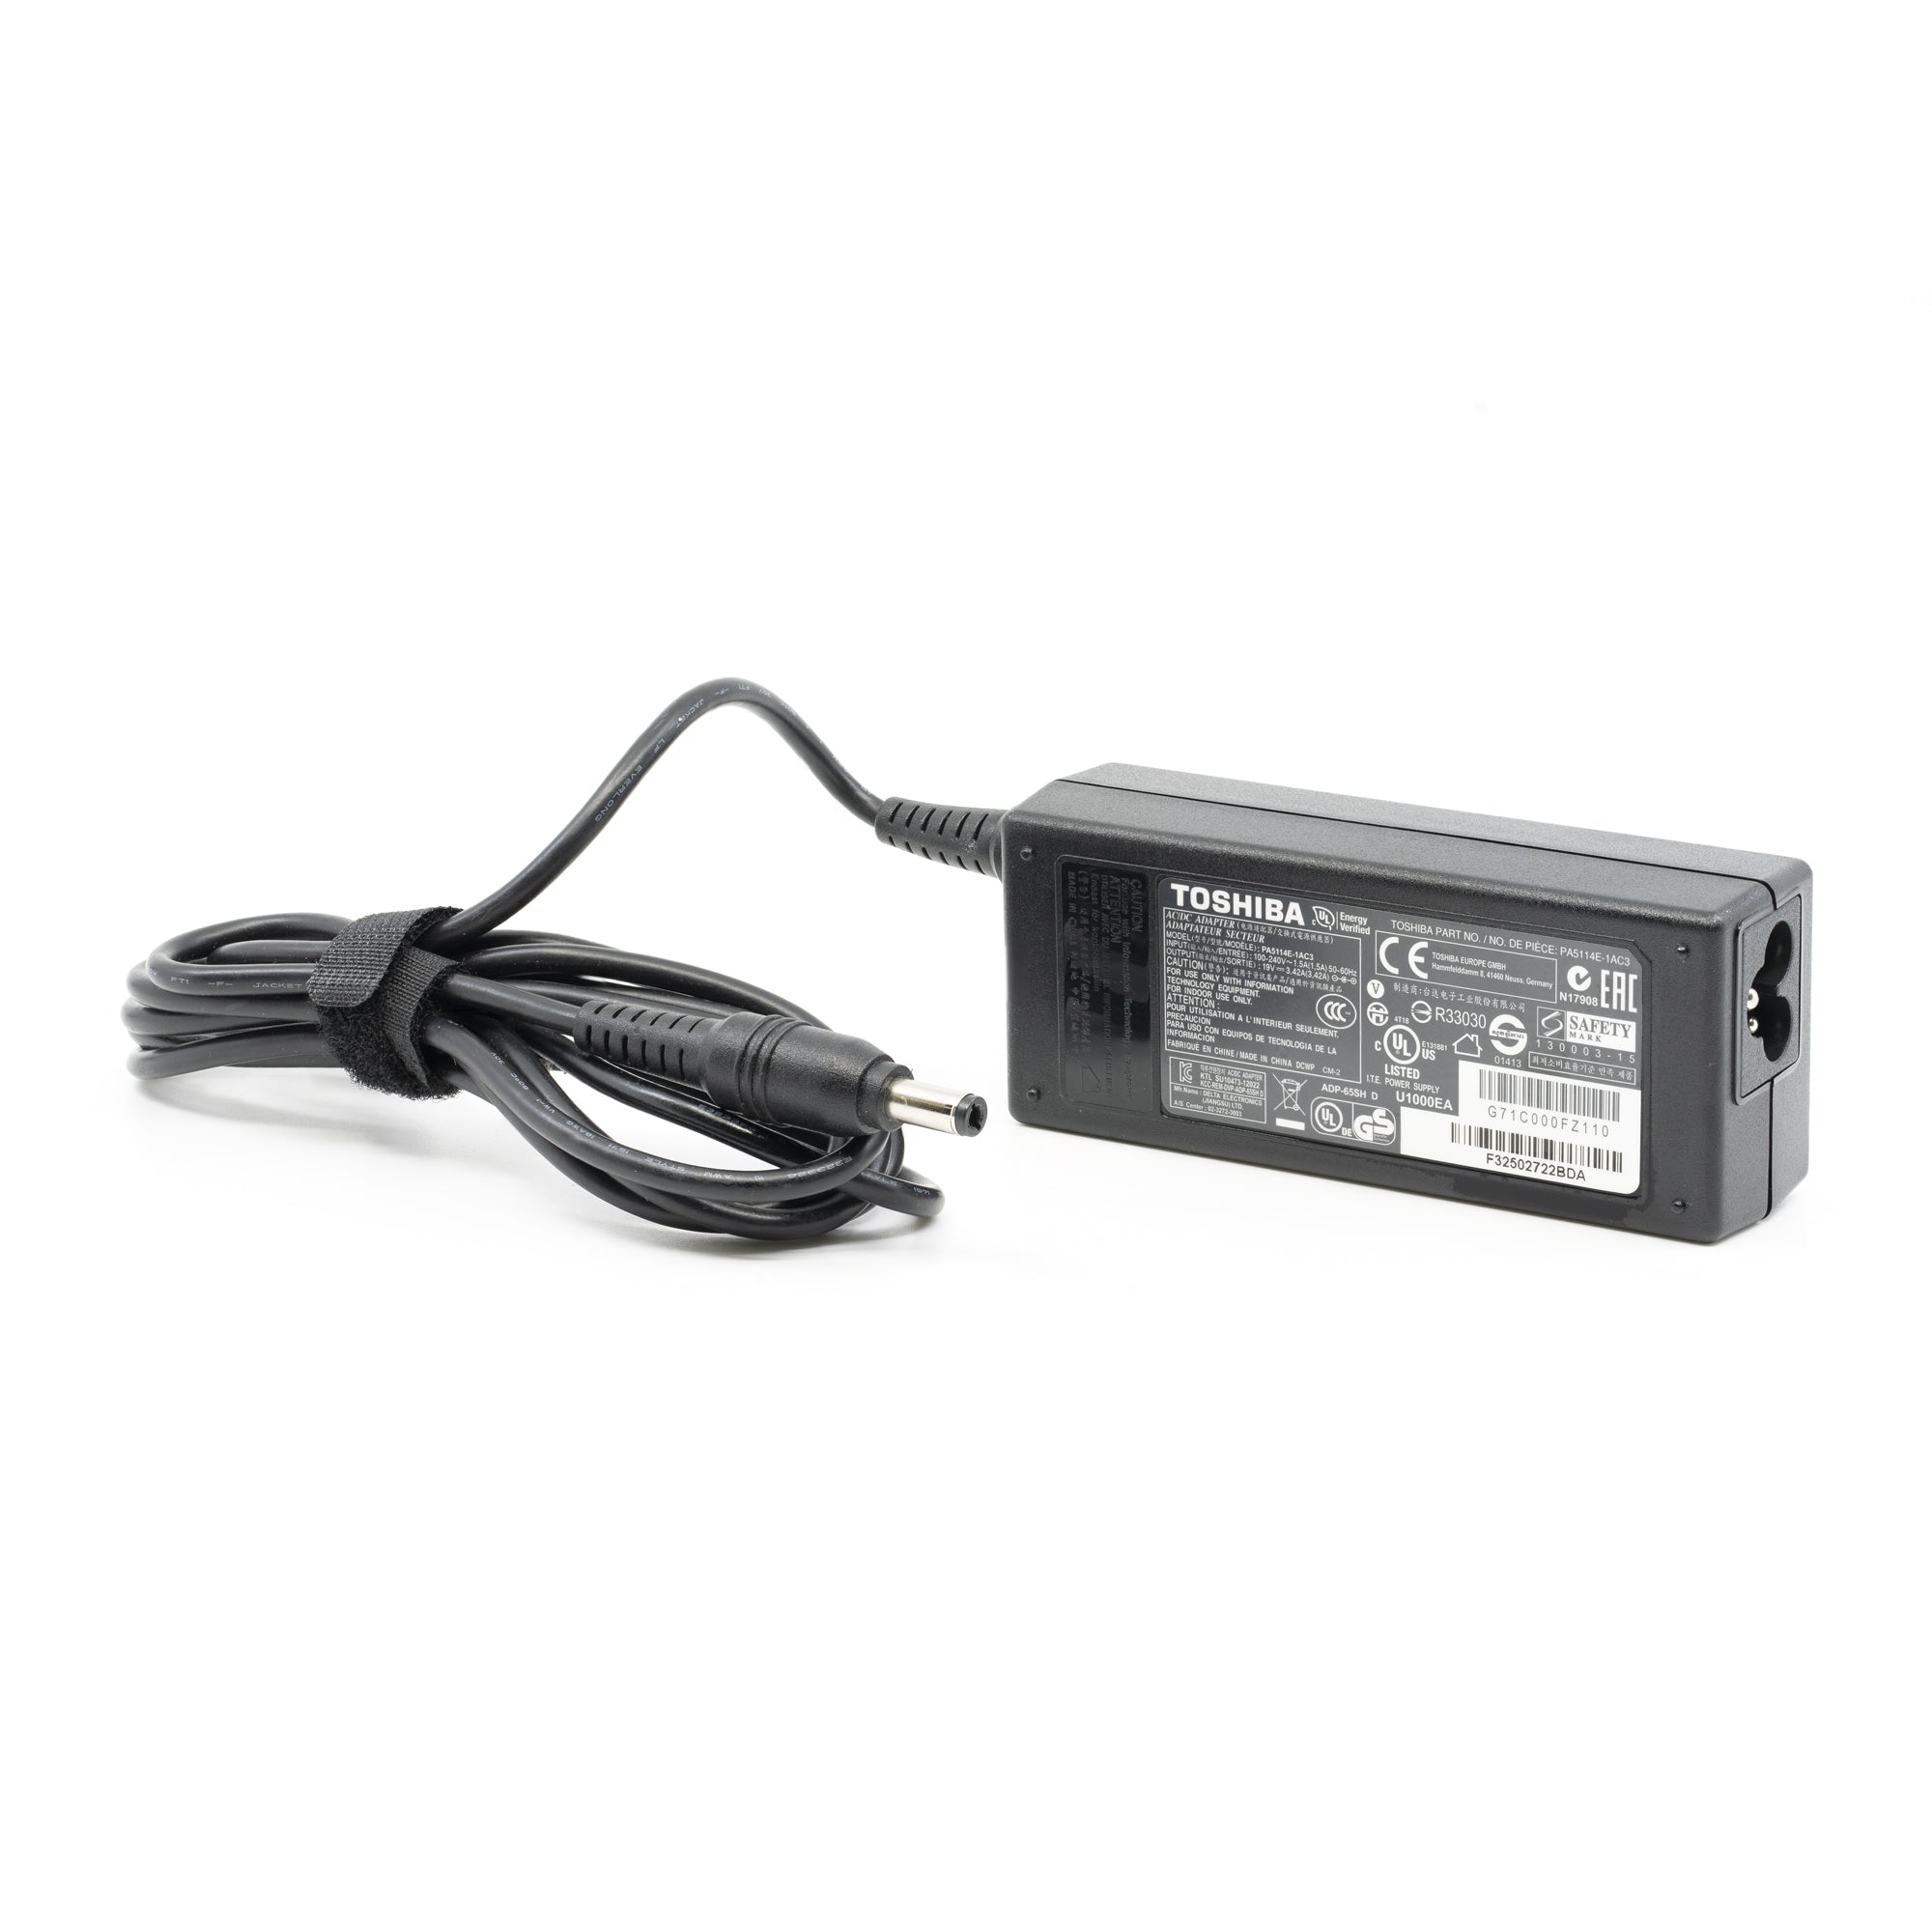 AC to DC 19v 3.4A 65W Refurbished Power Supply for Lipo Chargers with XT60 Cable Adapter